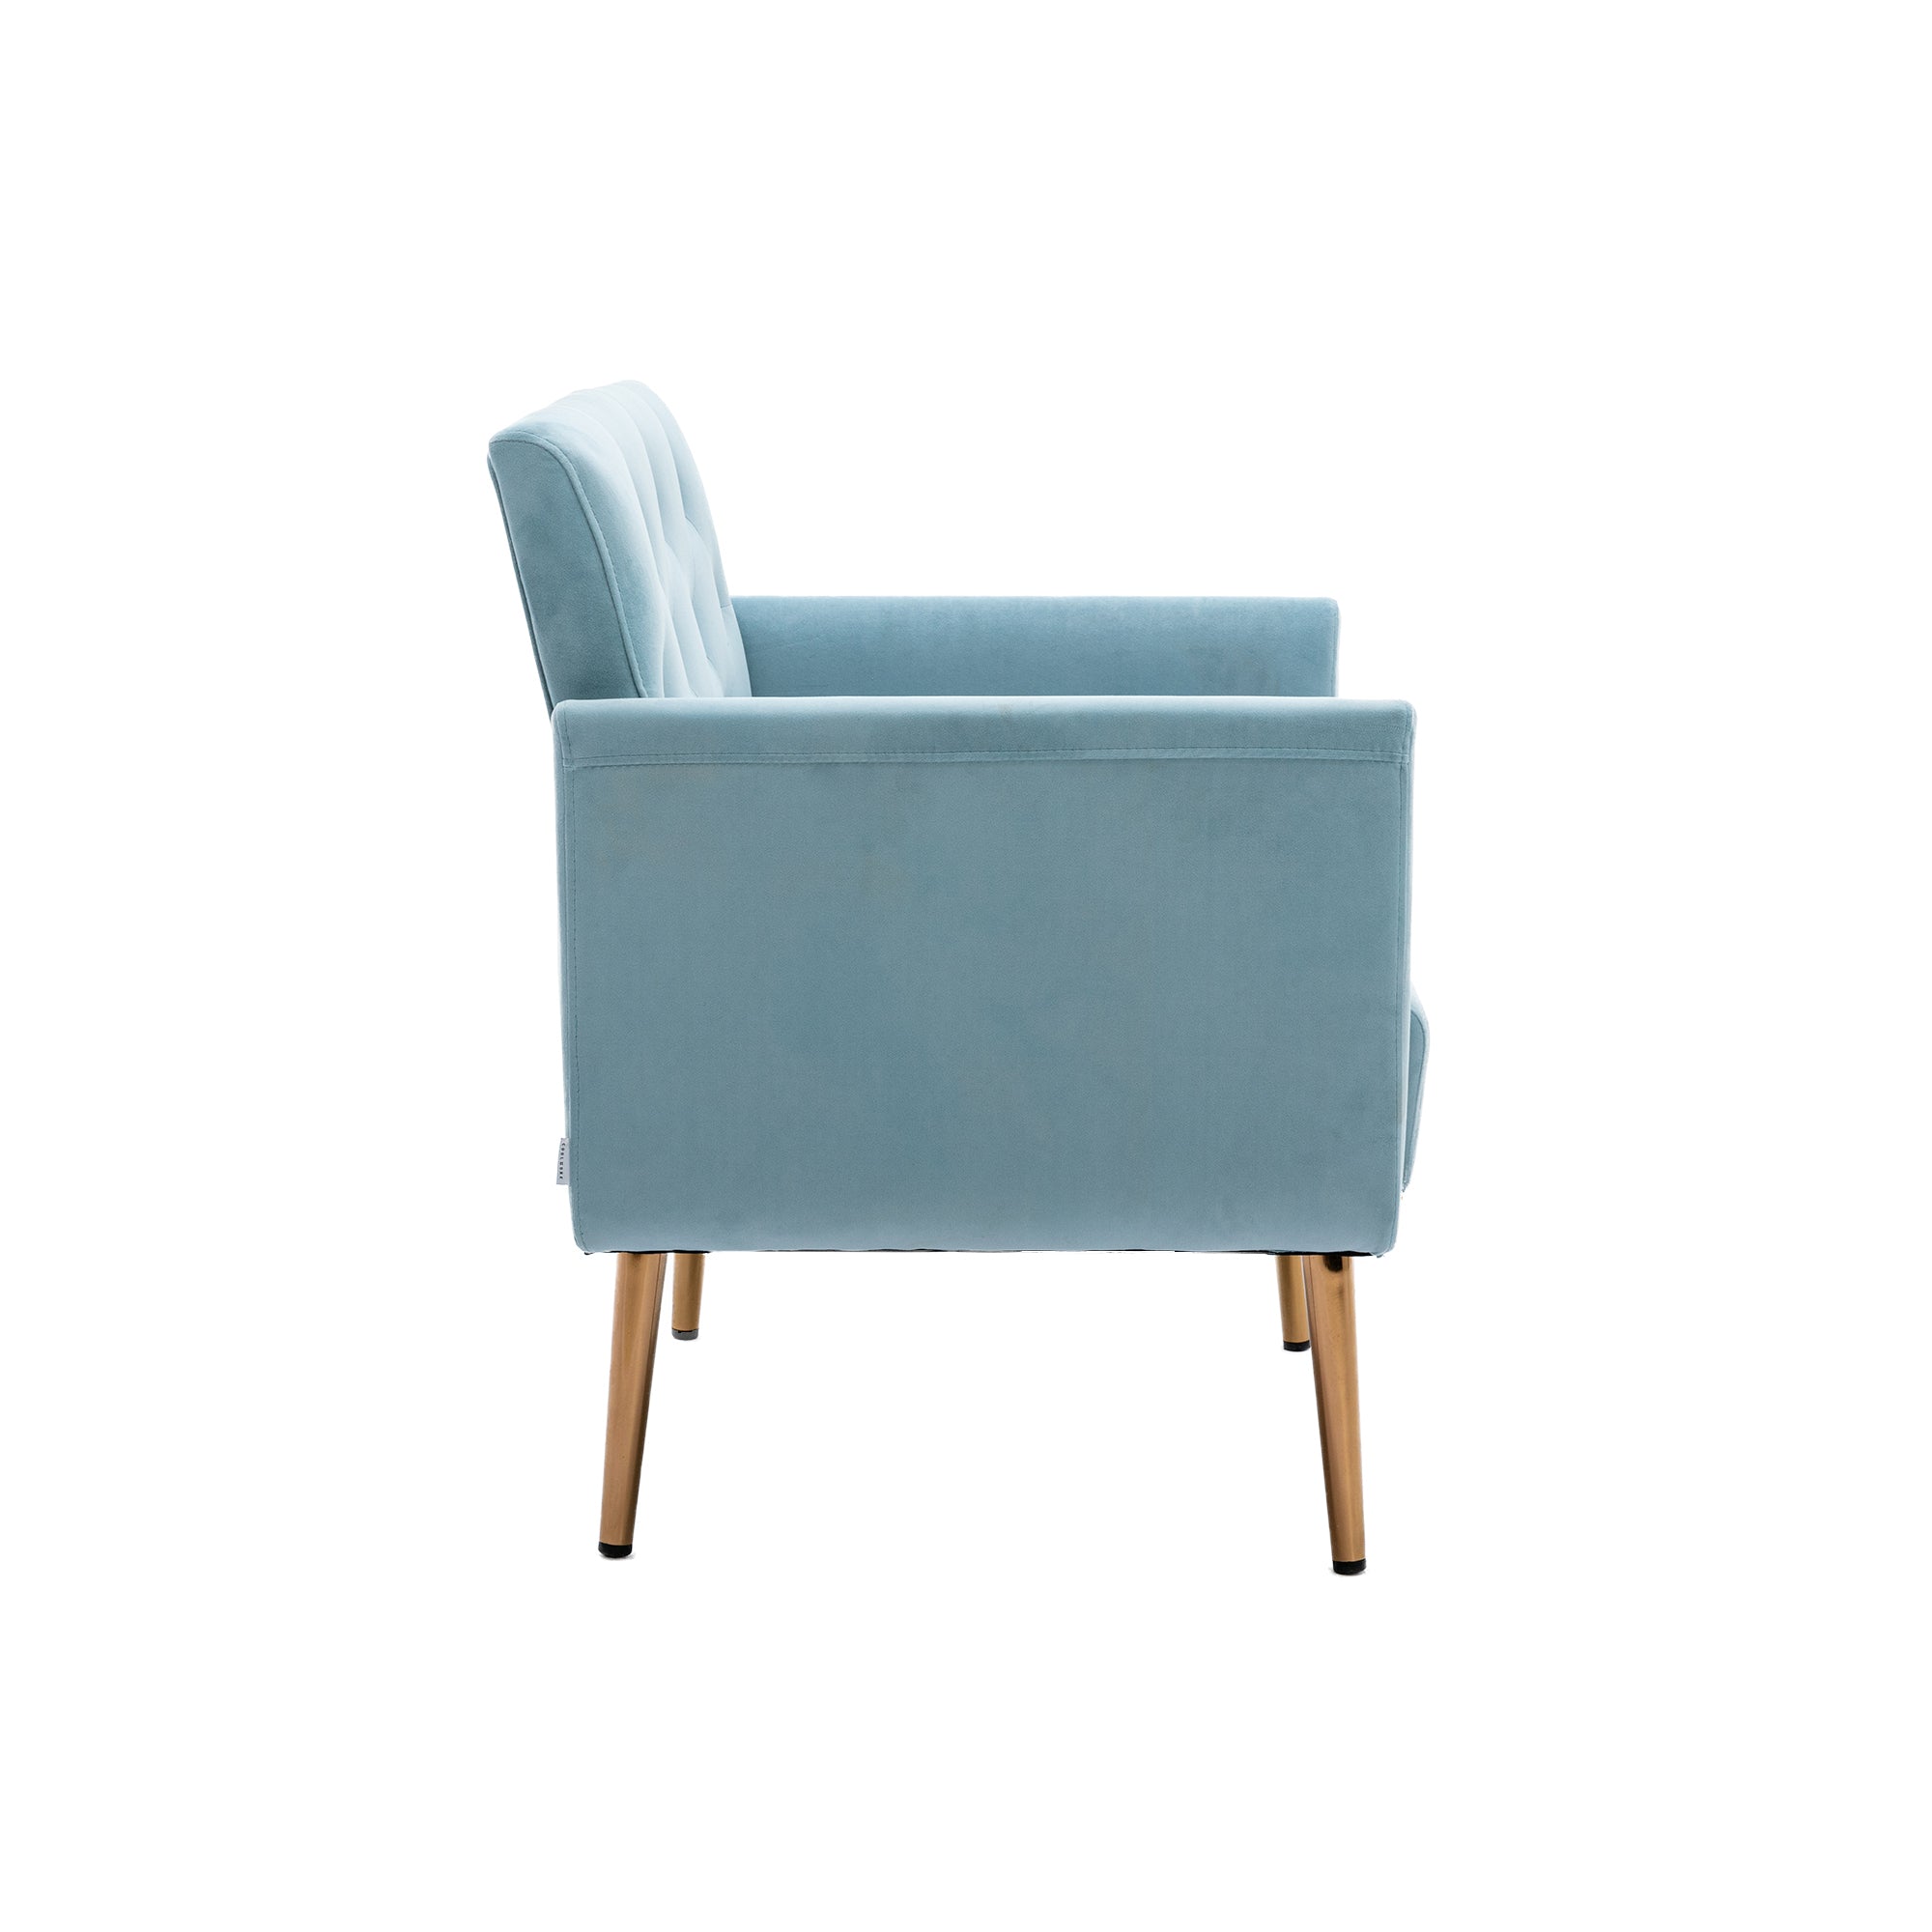 COOLMORE Accent Chair Leisure Single Sofa (Blue)